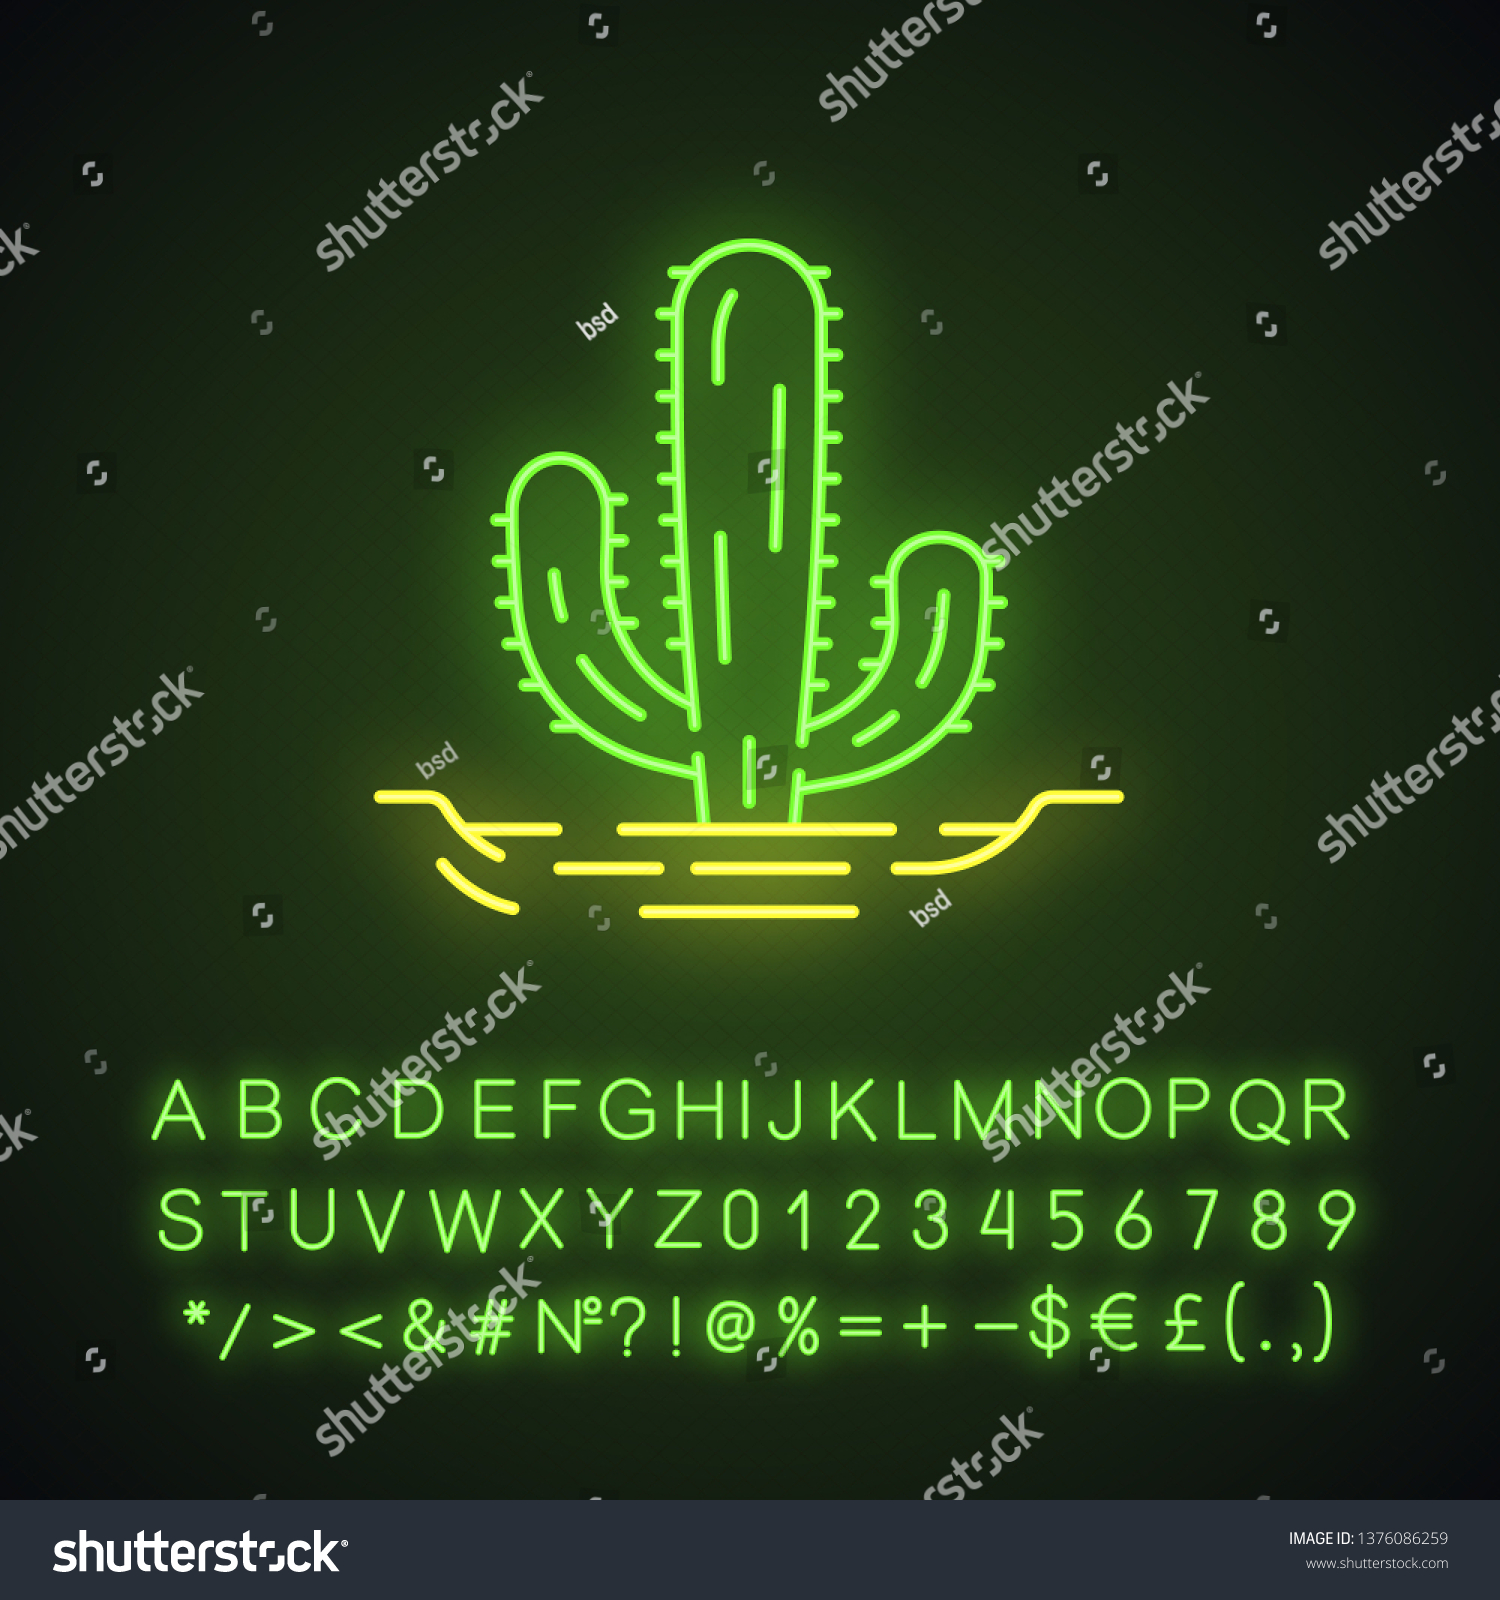 SVG of Mexican giant cactus in ground neon light icon. Cardon. Elephant cactus. Mexican flora. Tallest cacti. Glowing sign with alphabet, numbers and symbols. Vector isolated illustration svg